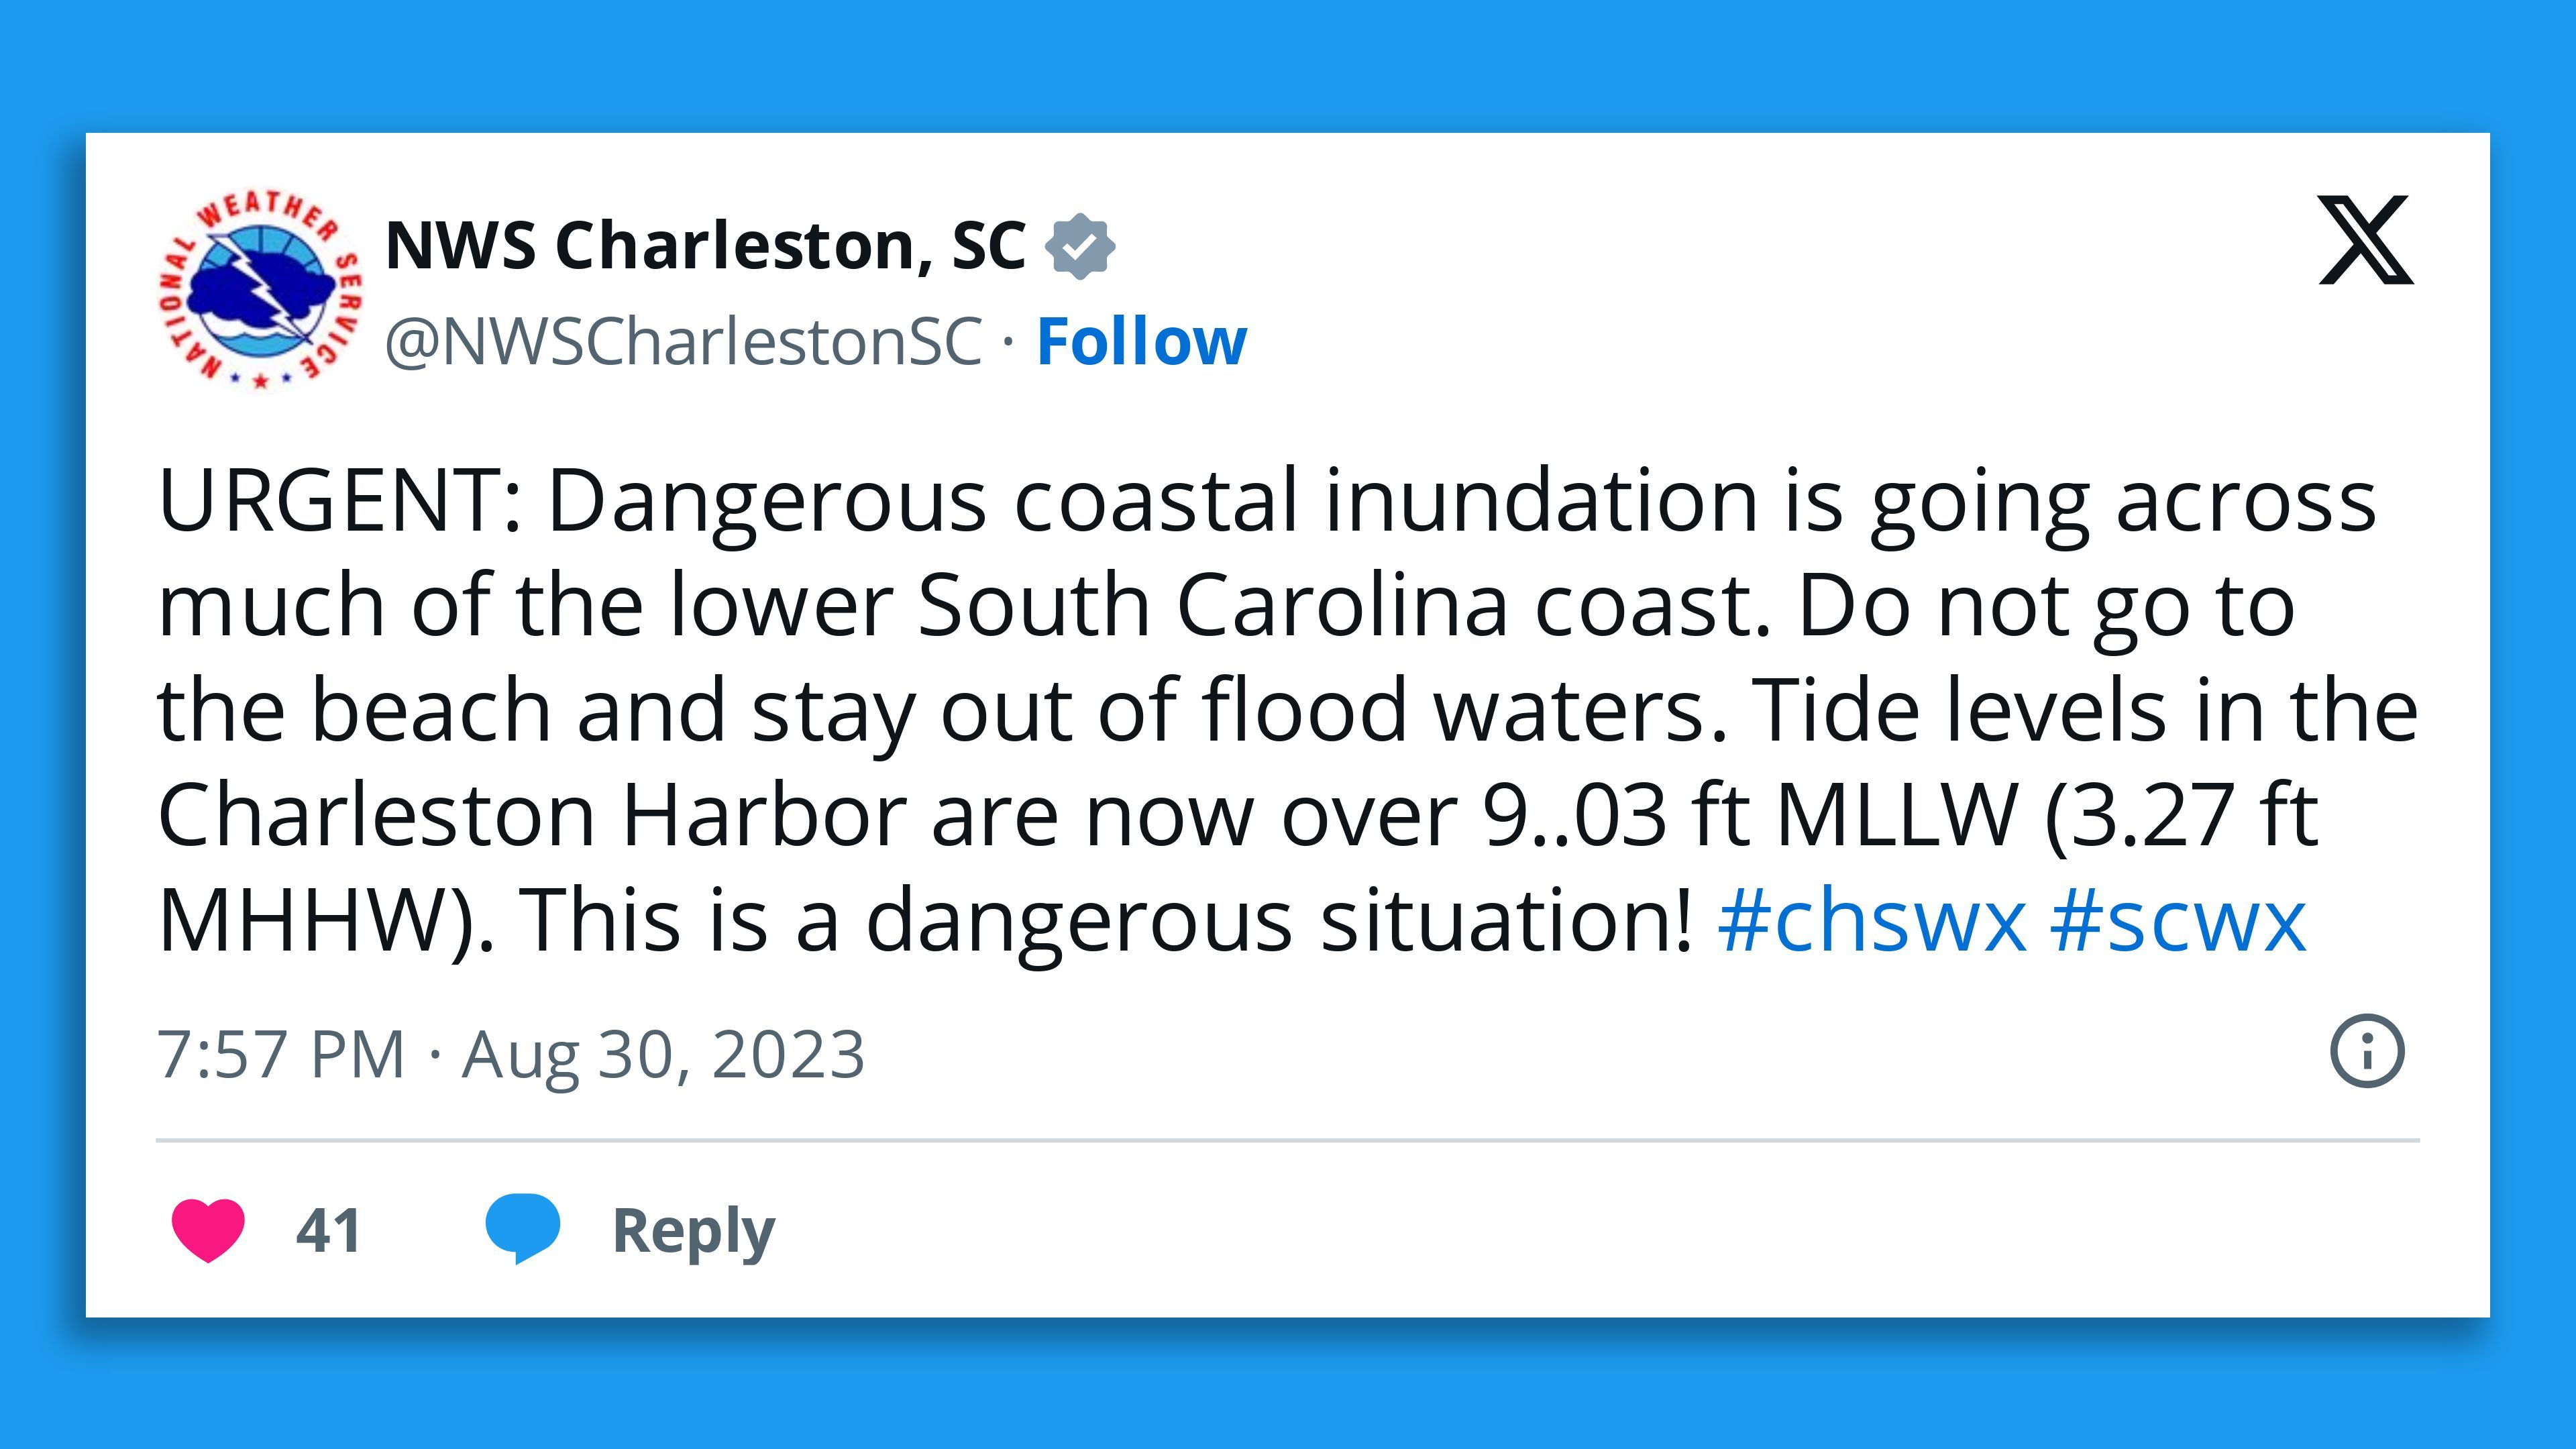 A screenshot of an NWS Charleston, S.C., tweet saying: " URGENT: Dangerous coastal inundation is going across much of the lower South Carolina coast. Do not go to the beach and stay out of flood waters. Tide levels in the Charleston Harbor are now over 9..03 ft MLLW (3.27 ft MHHW). This is a dangerous situation!"